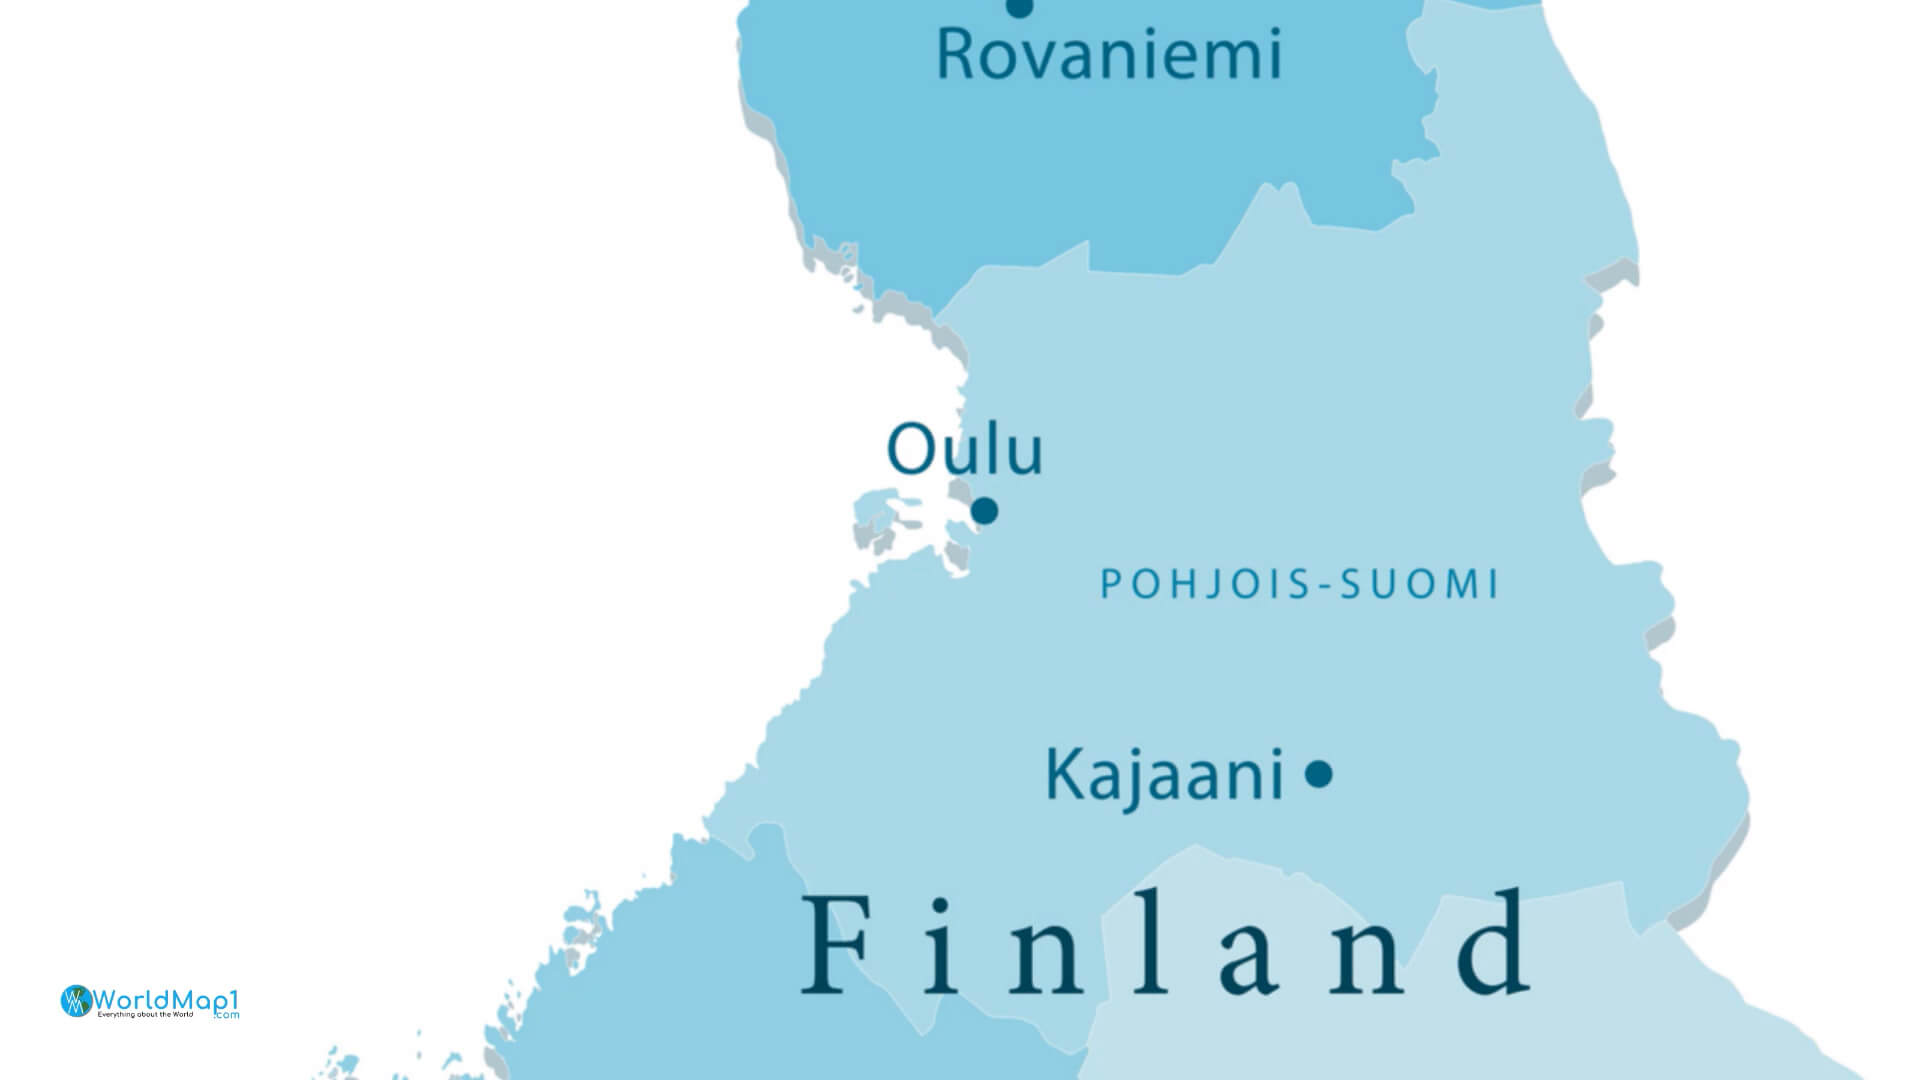 Finland Cities Map with Rovaniemi Oulu and Kajaani